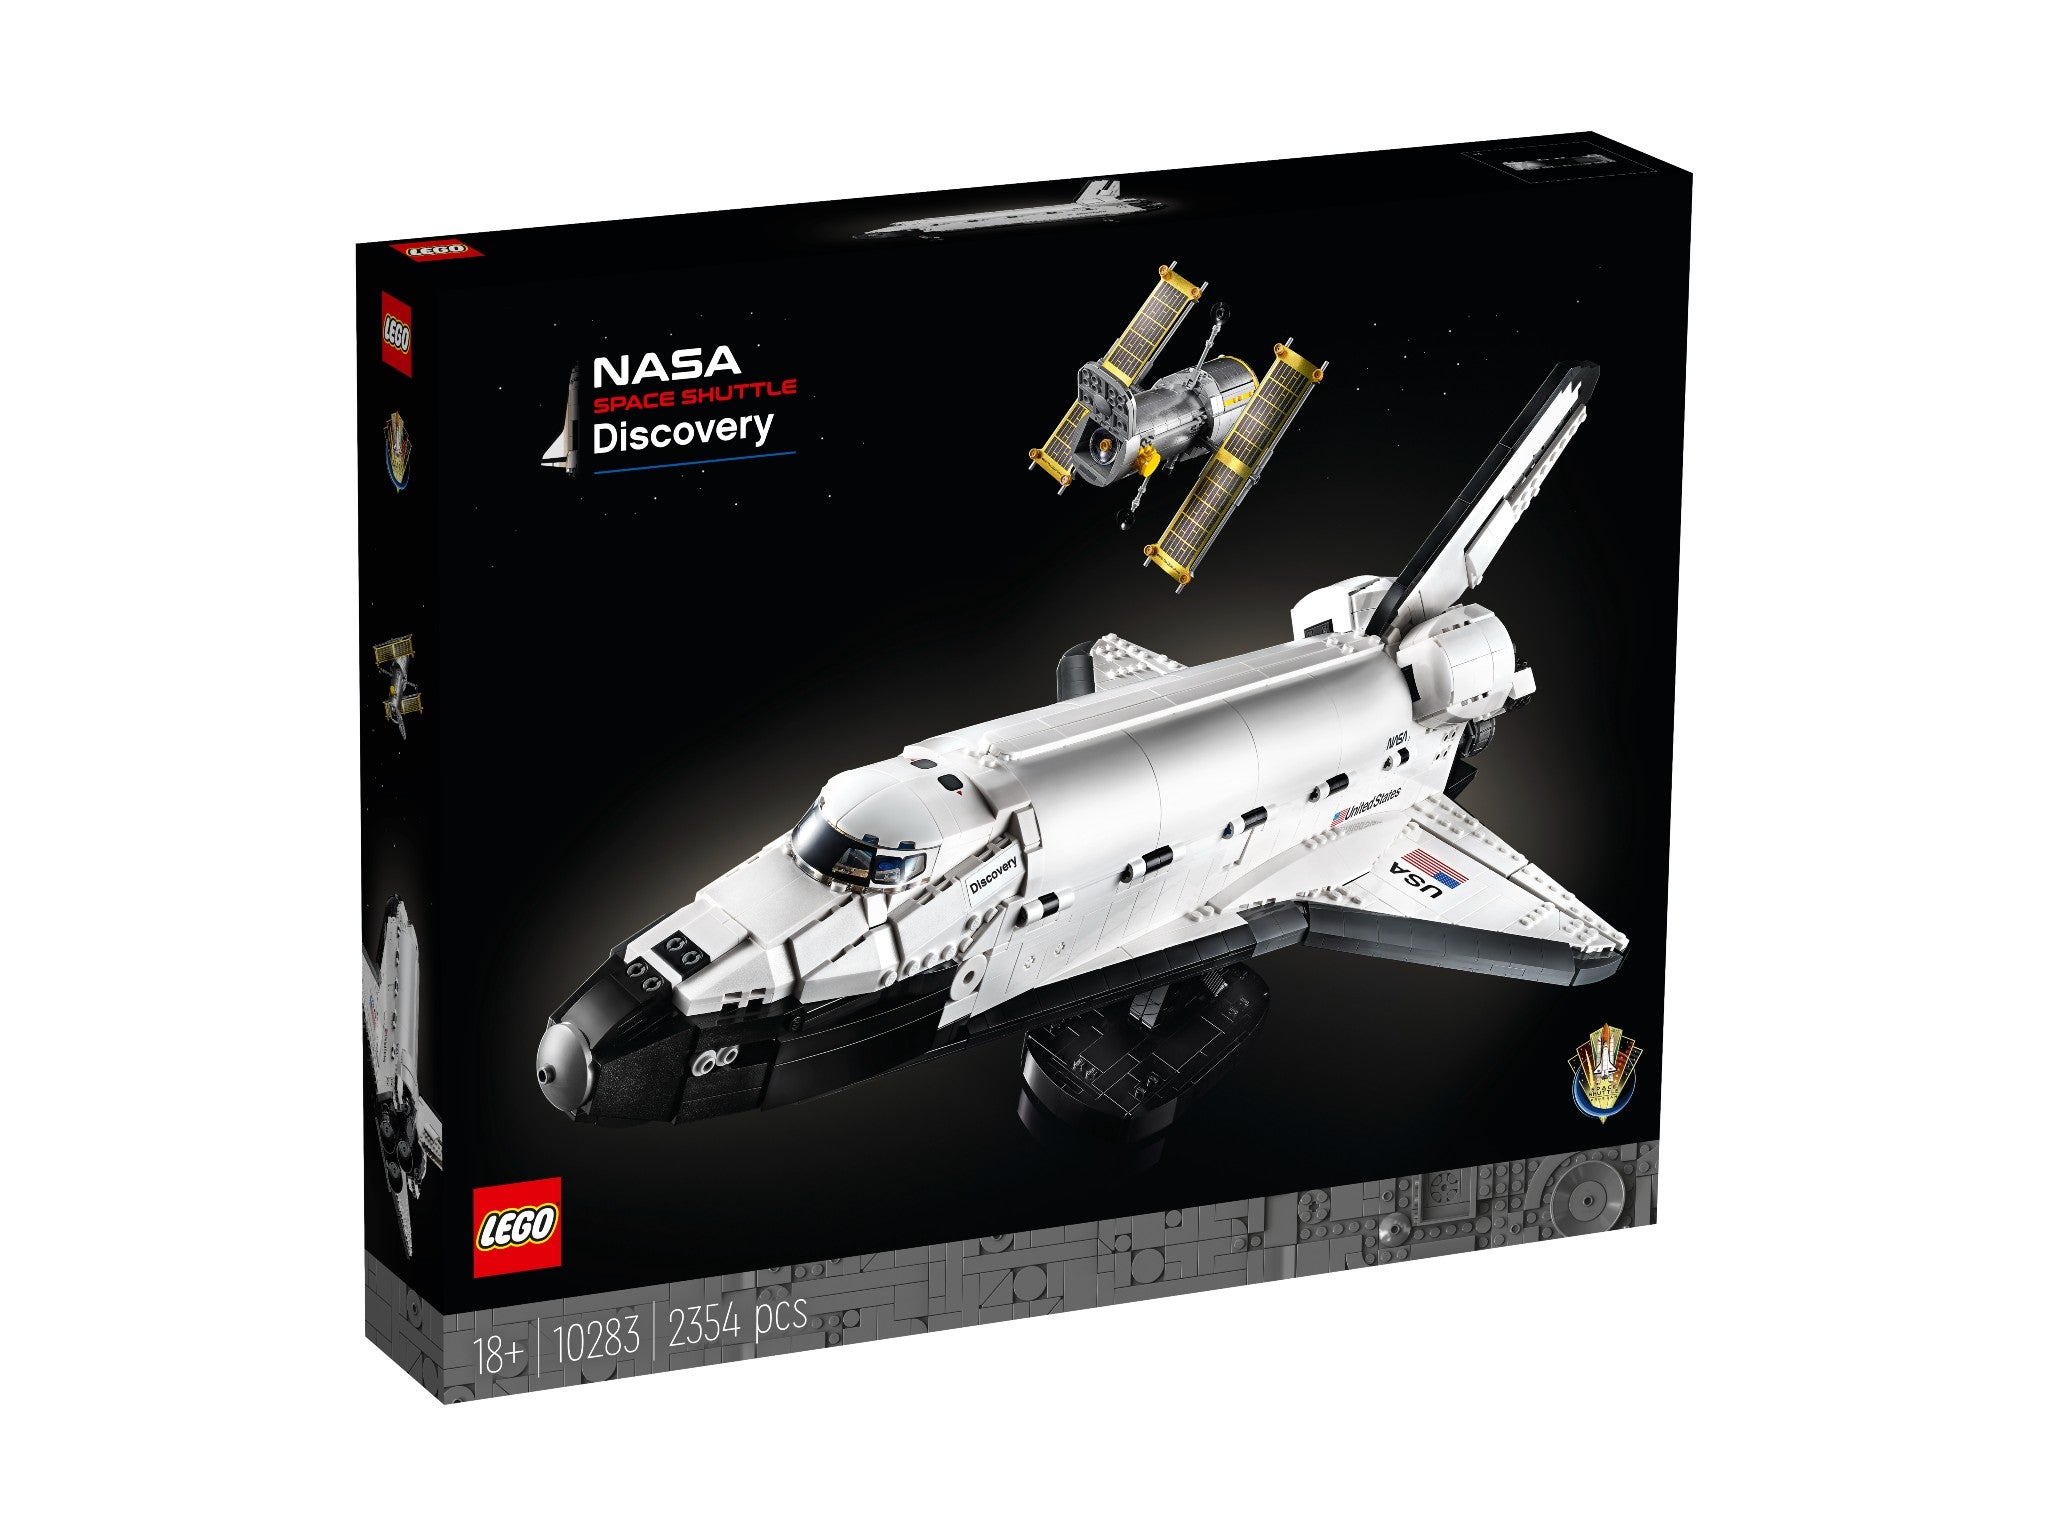 Lego NASA space shuttle Discovery indybest.jpg